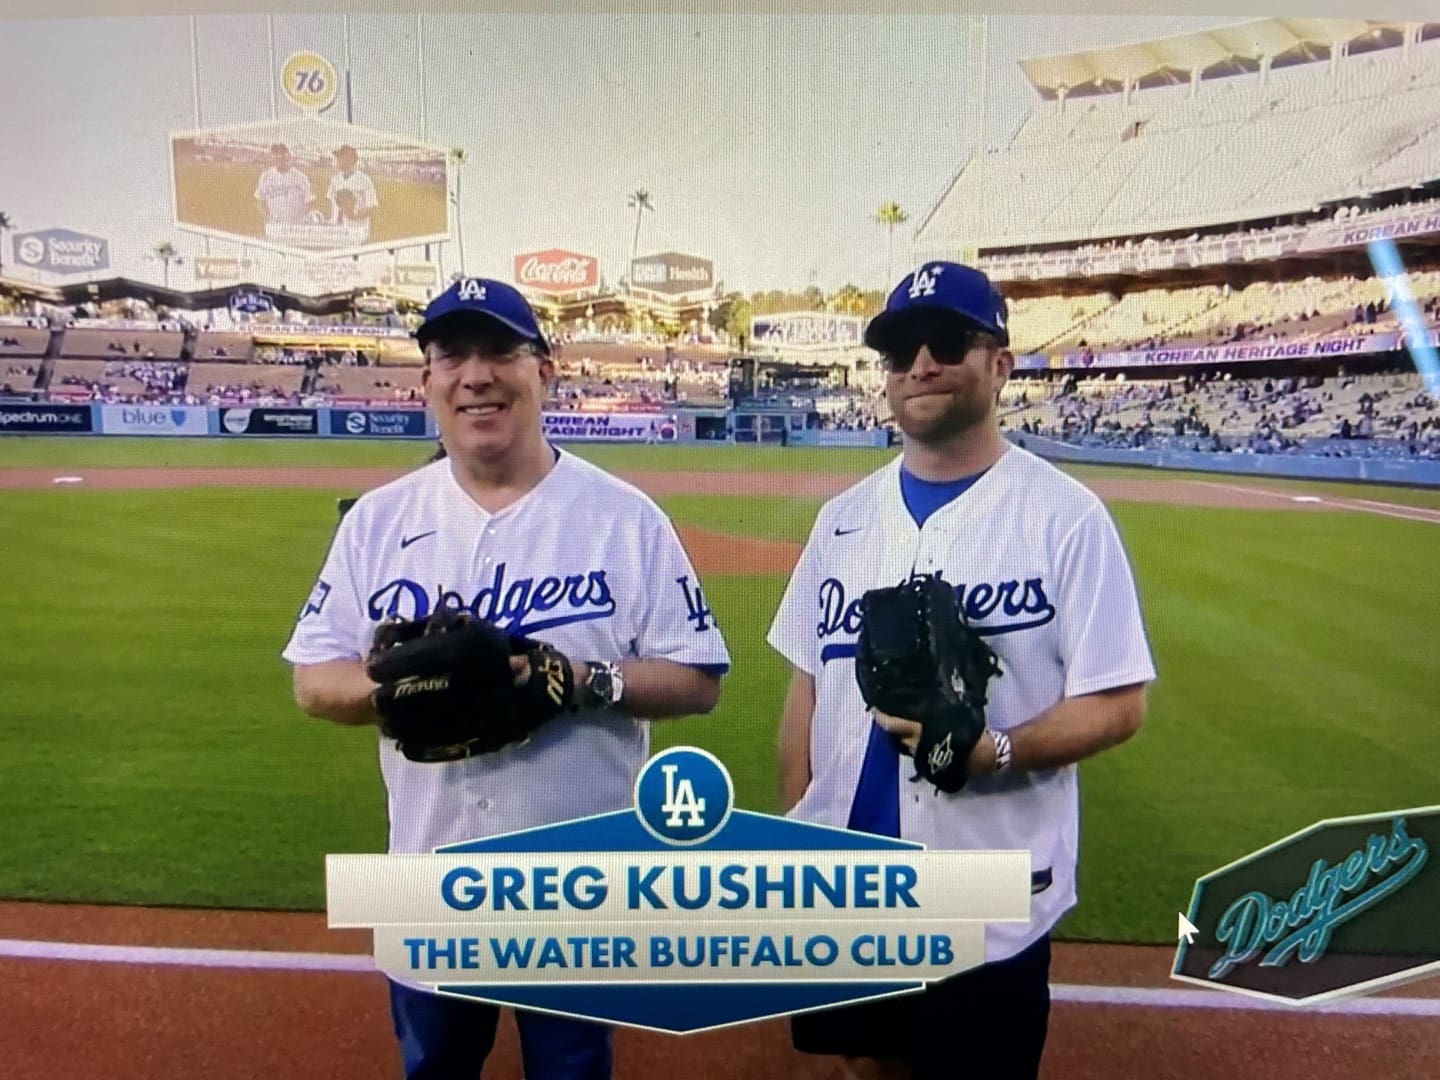 WBC Father and Son Members Greg and Jake Kushner got to participate in a once in a lifetime experience.